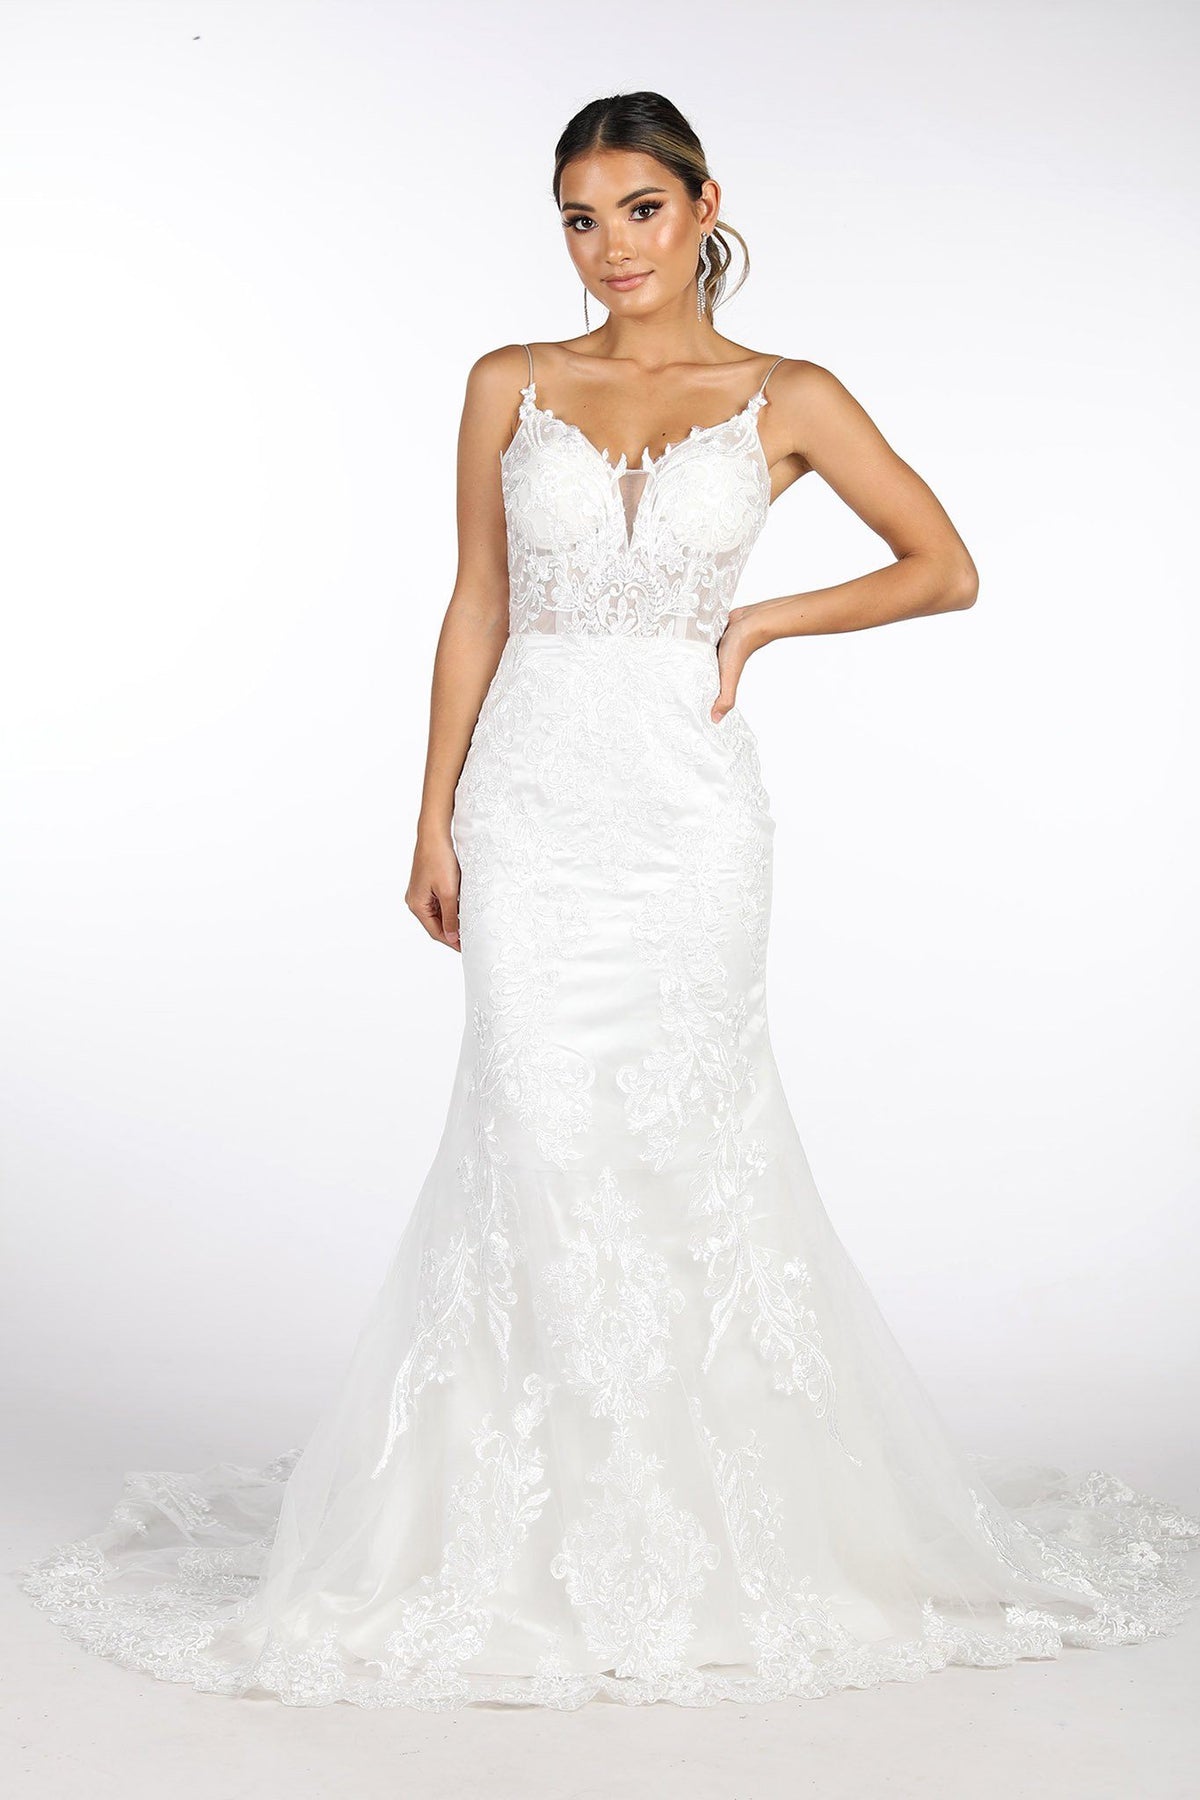 Ivory Coloured Full Length Lace Wedding Gown featuring Deep Illusion V-Neck, Thin Shoulder Straps, Lace Motifs on Tulle over Chantilly Lace from the Bodice Trailing Down on the Dramatic Scalloped Train